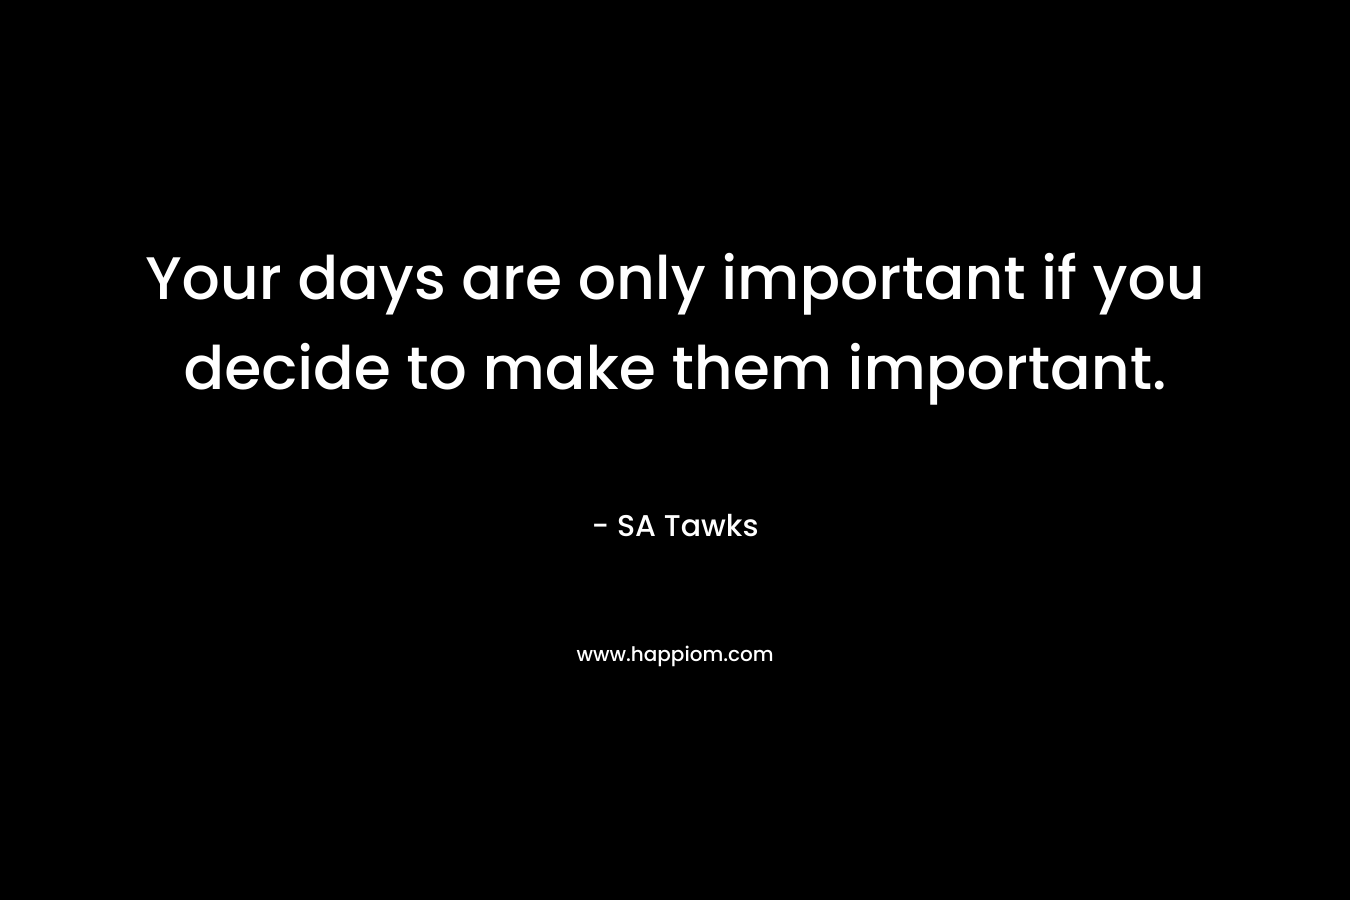 Your days are only important if you decide to make them important.